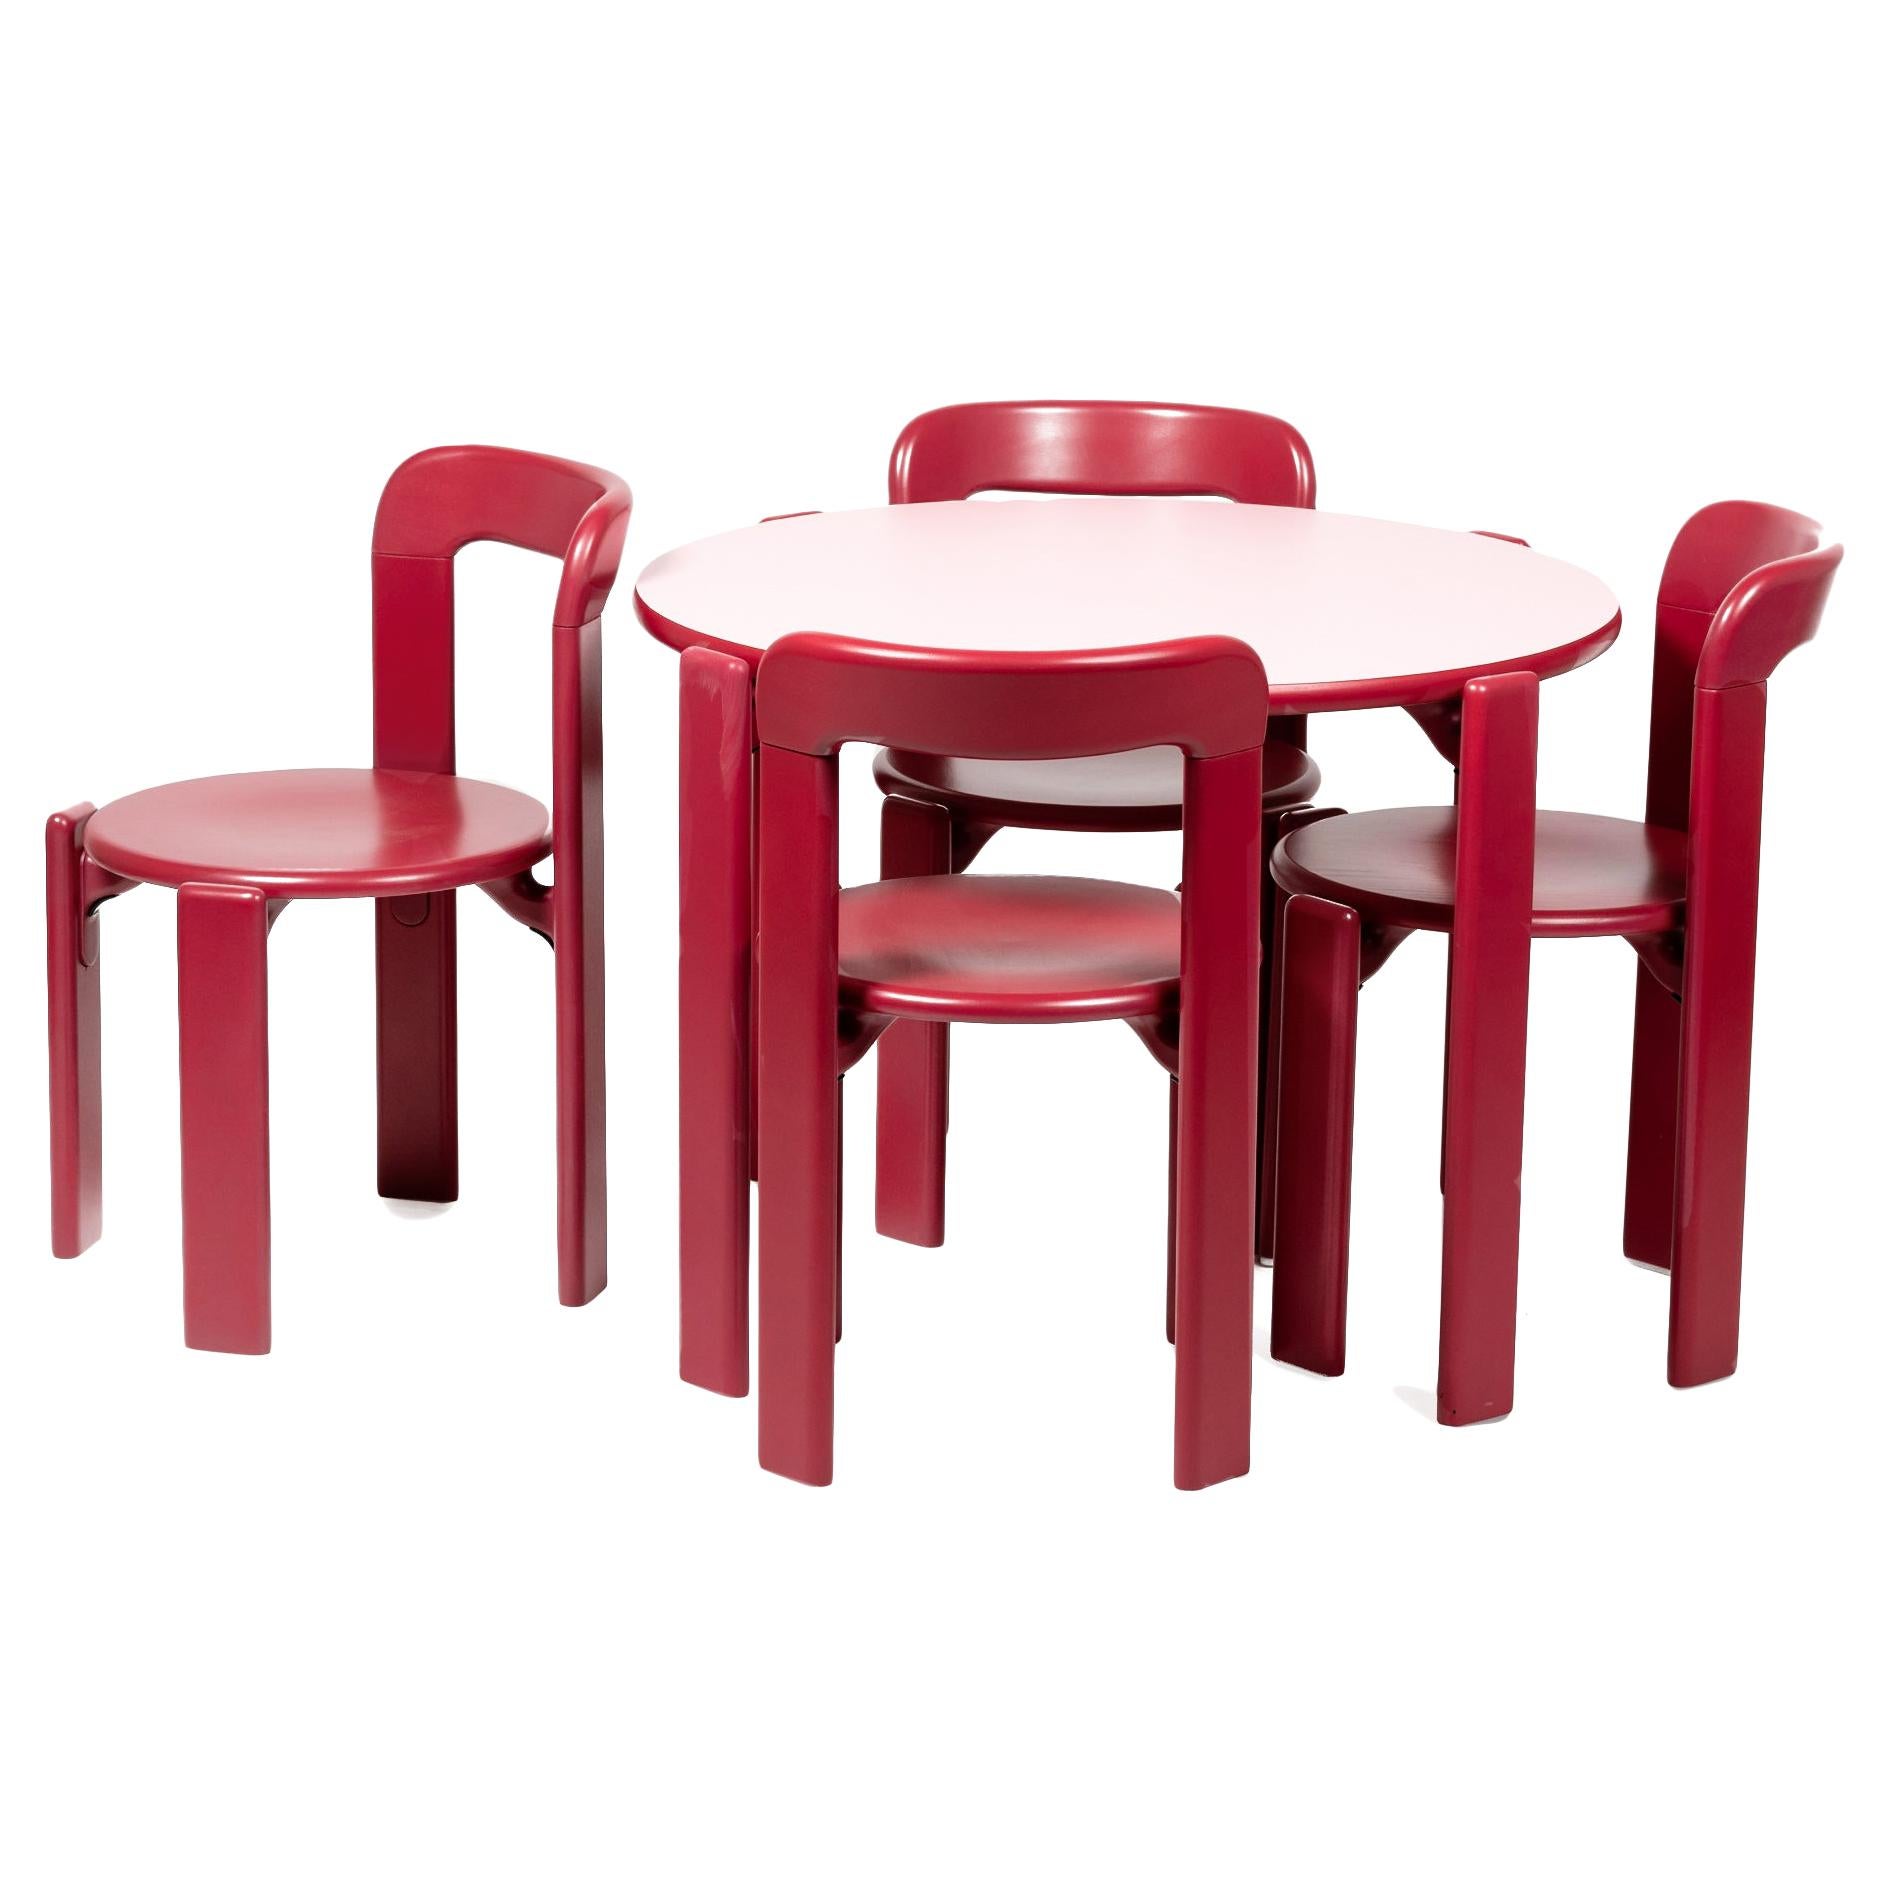 Dietiker Rey Junior Set, Kids Table and Chairs in Pink, Designed by Bruno Rey